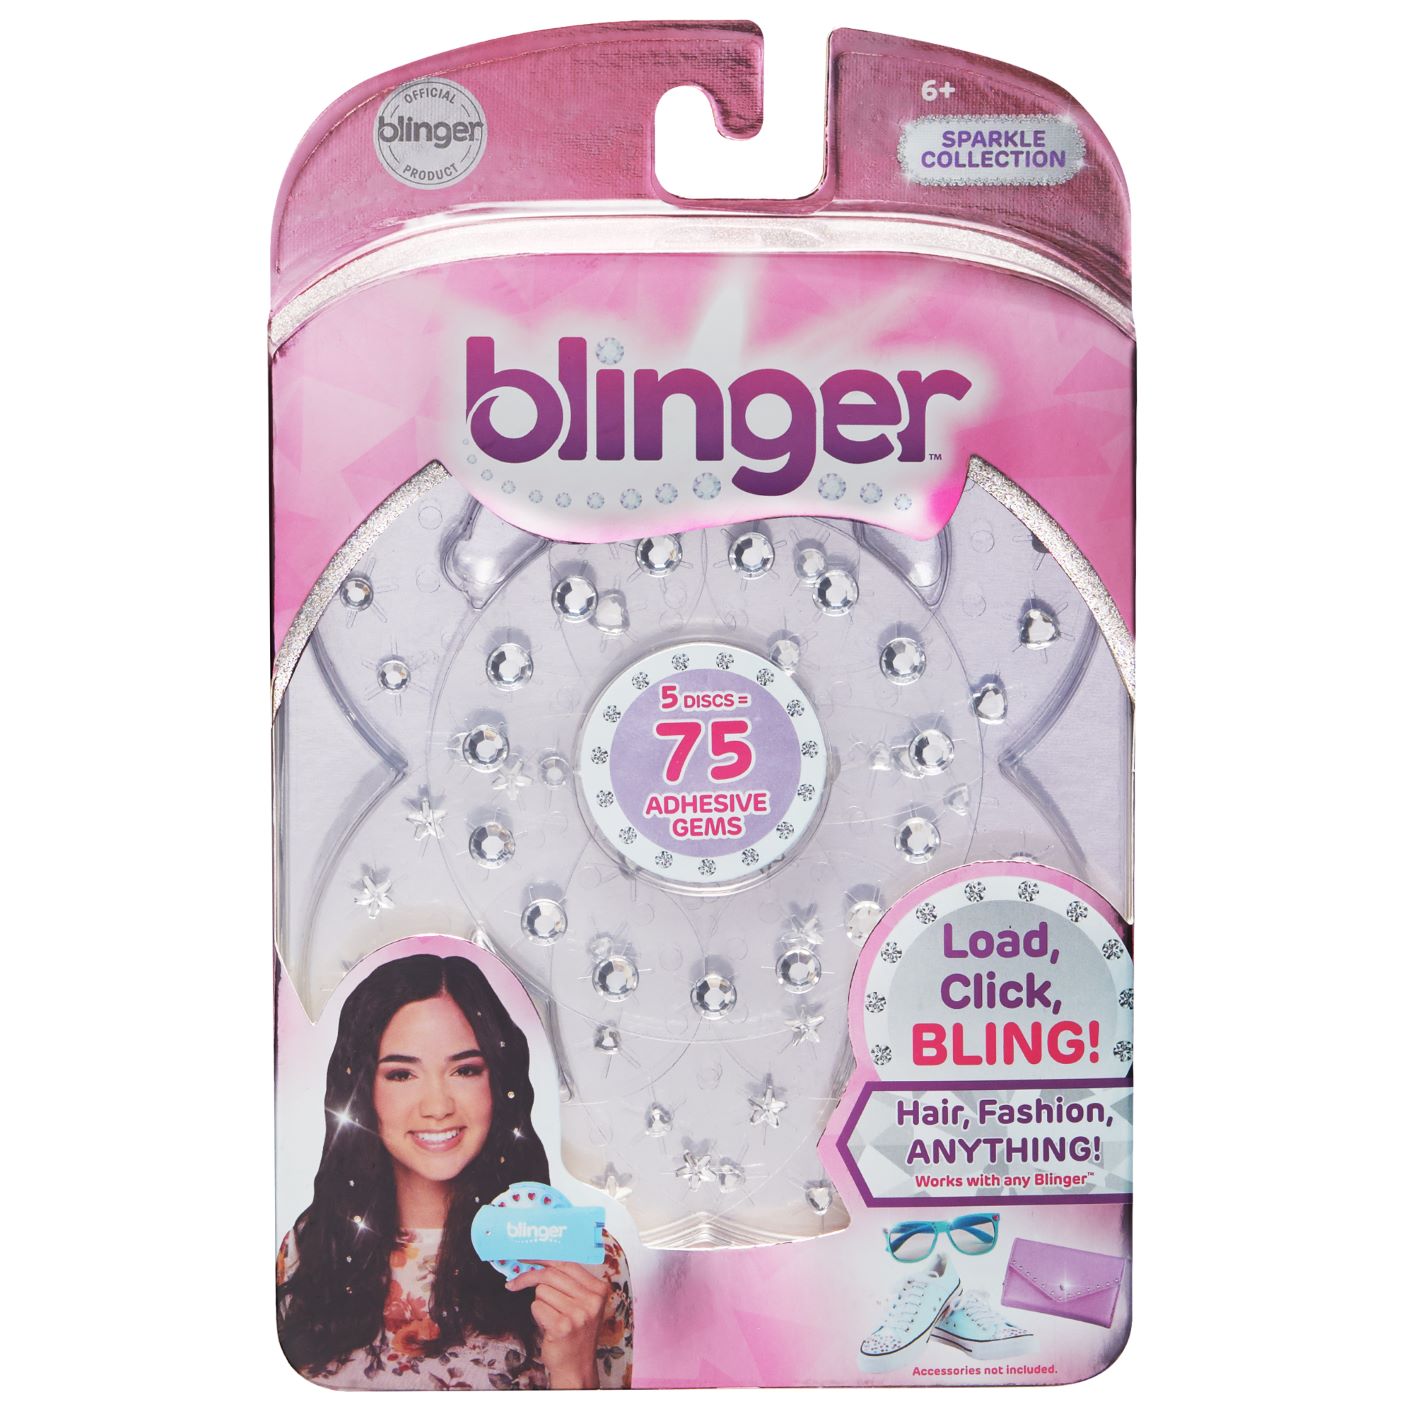 Blinger 5 Piece Refill Pack - Sparkle Collection Brilliance Pack - image 1 of 6